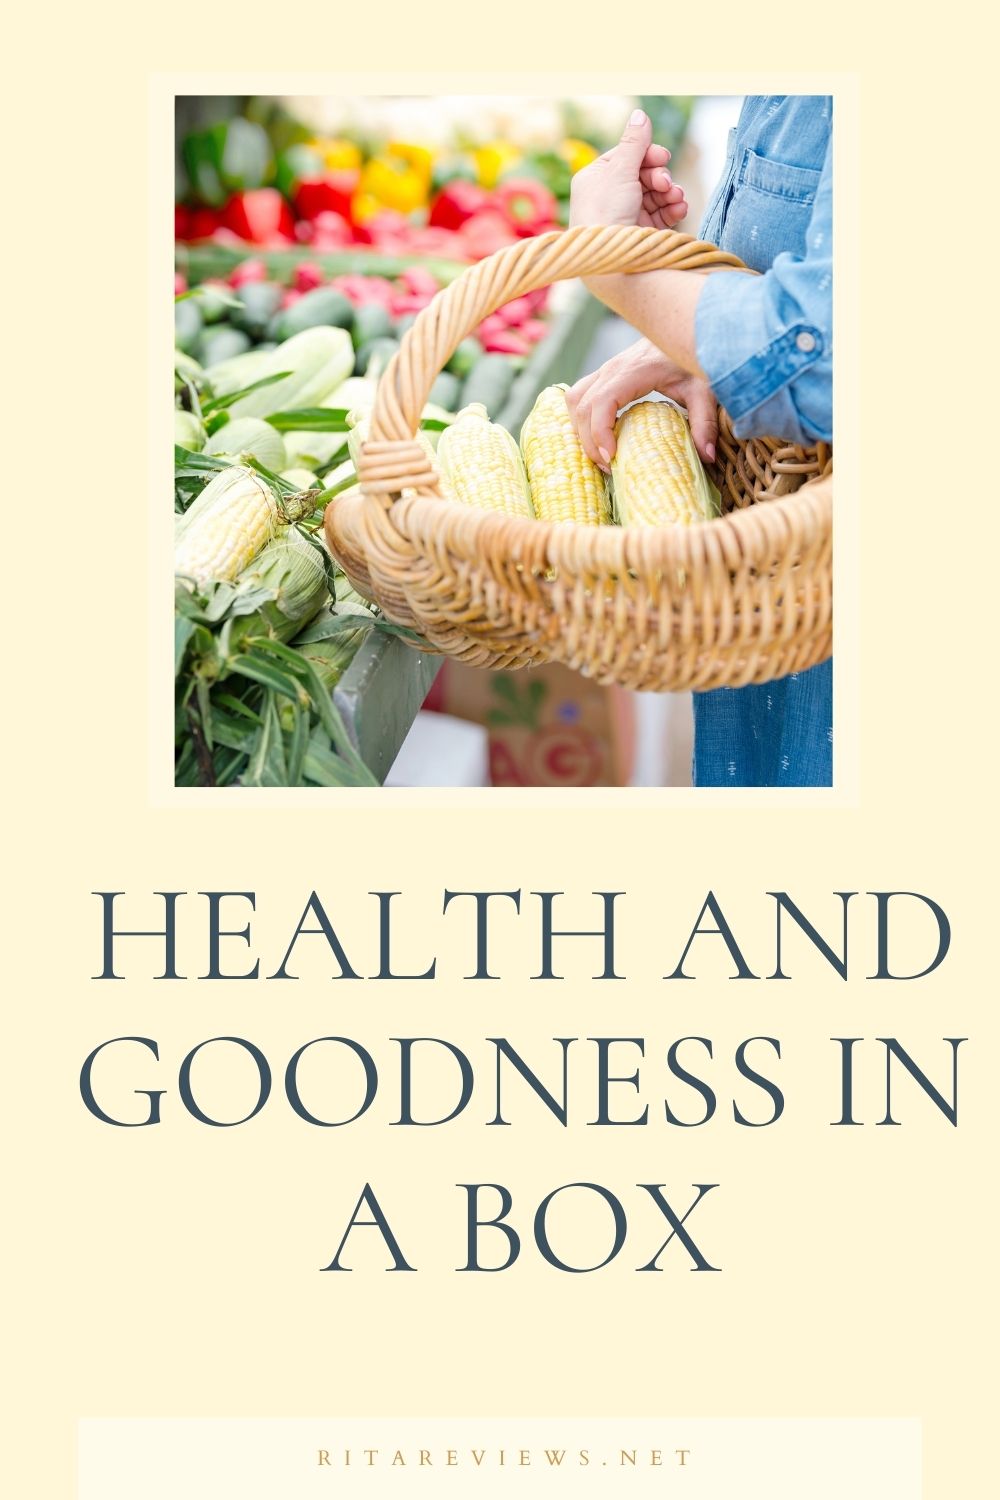 Health and goodness in a box